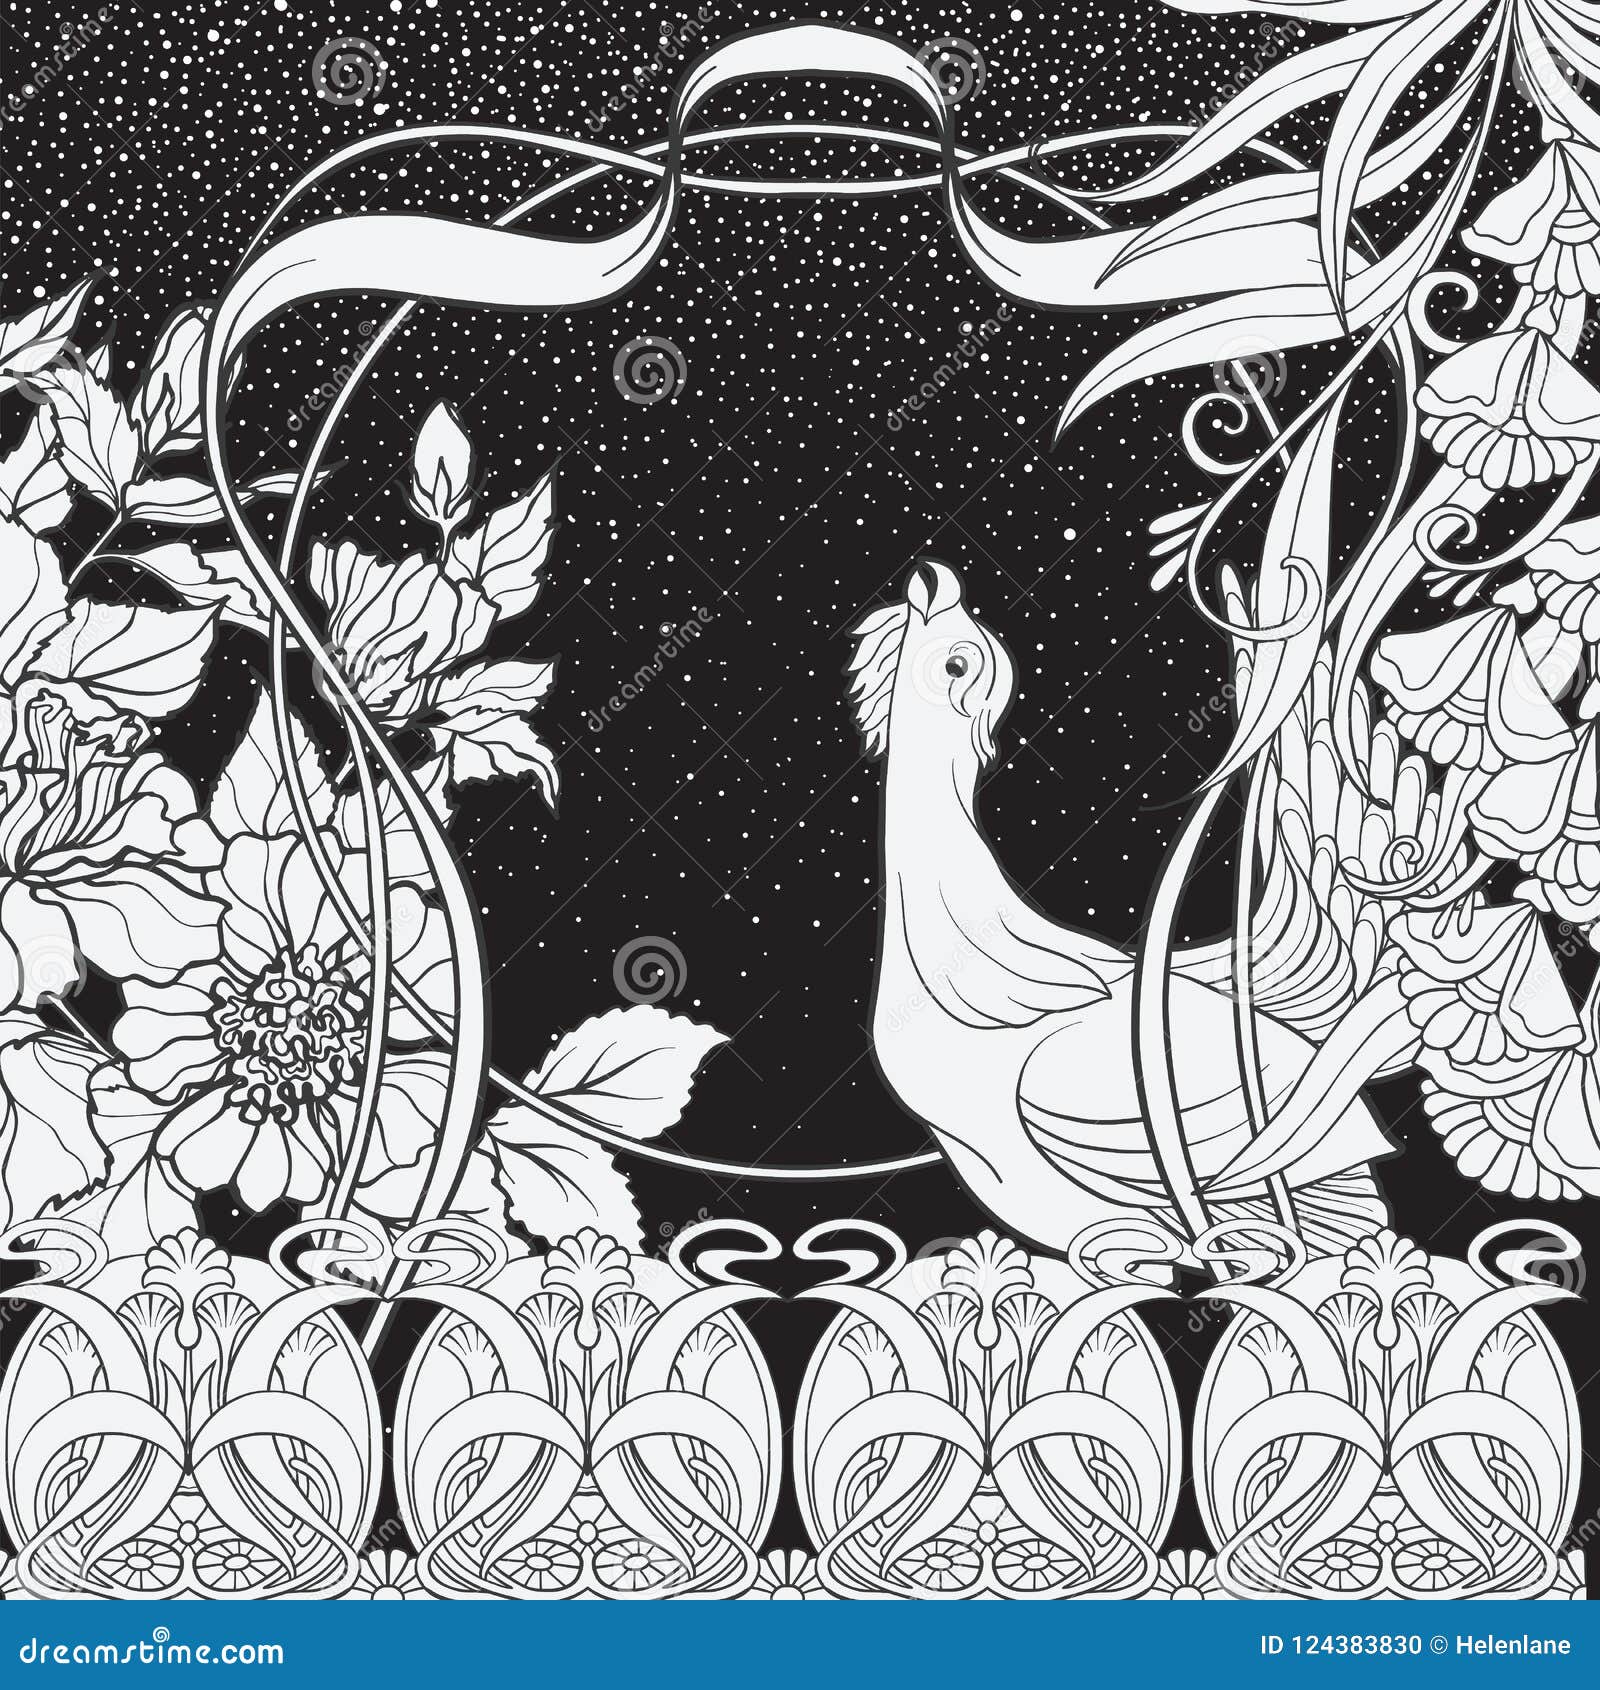 Poster Background With Decorative Flowers And Bird In Art Nouveau Style Black And White Graphics N Stock Vector Illustration Of Floral Ornamental